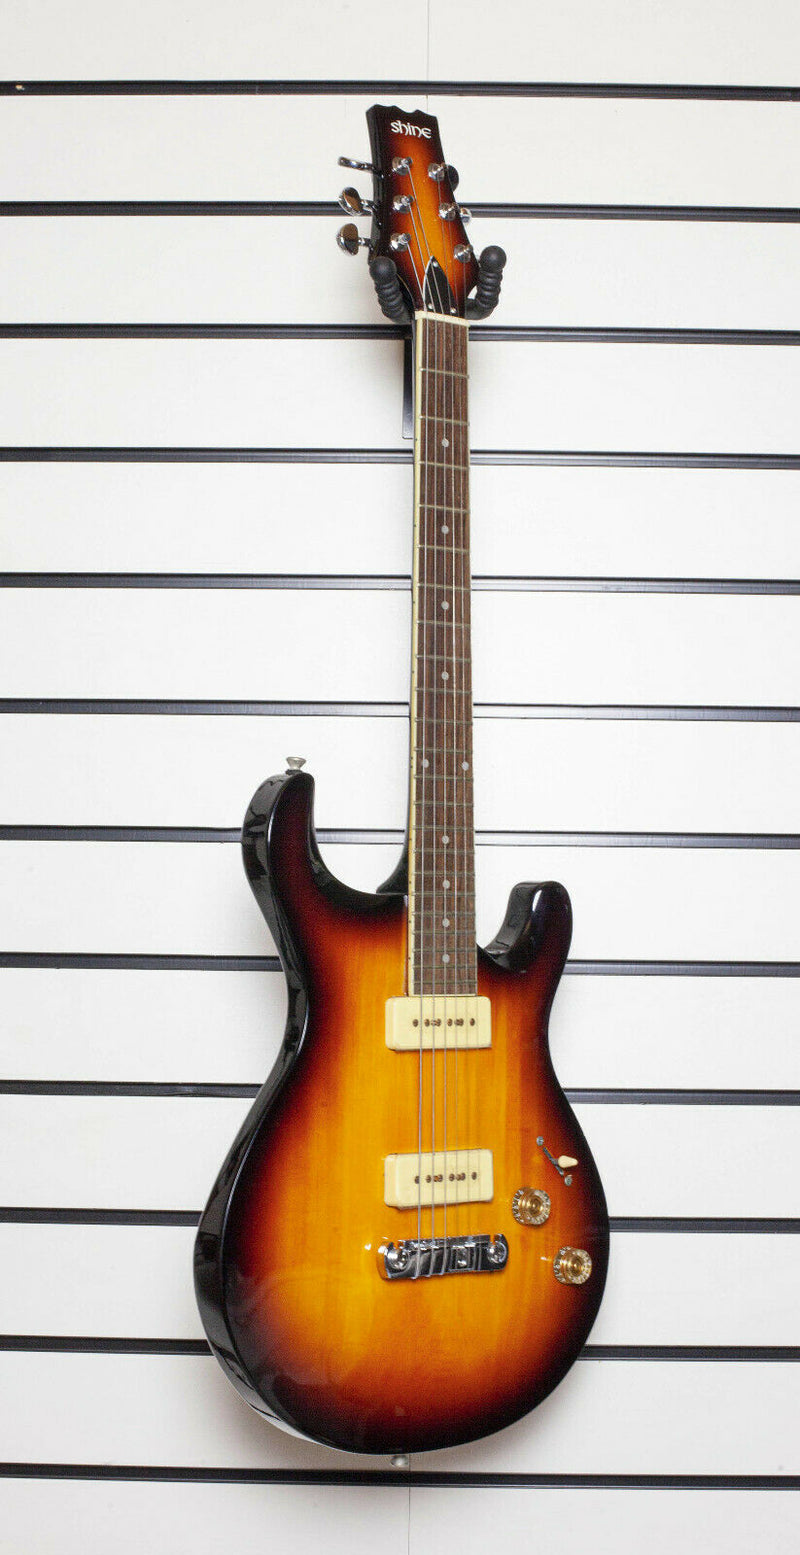 Shine Electric Guitar Sunburst P90 Style Pickups Double Cut Away Set Neck Y-39 - Shop Display Item | Open Never Used